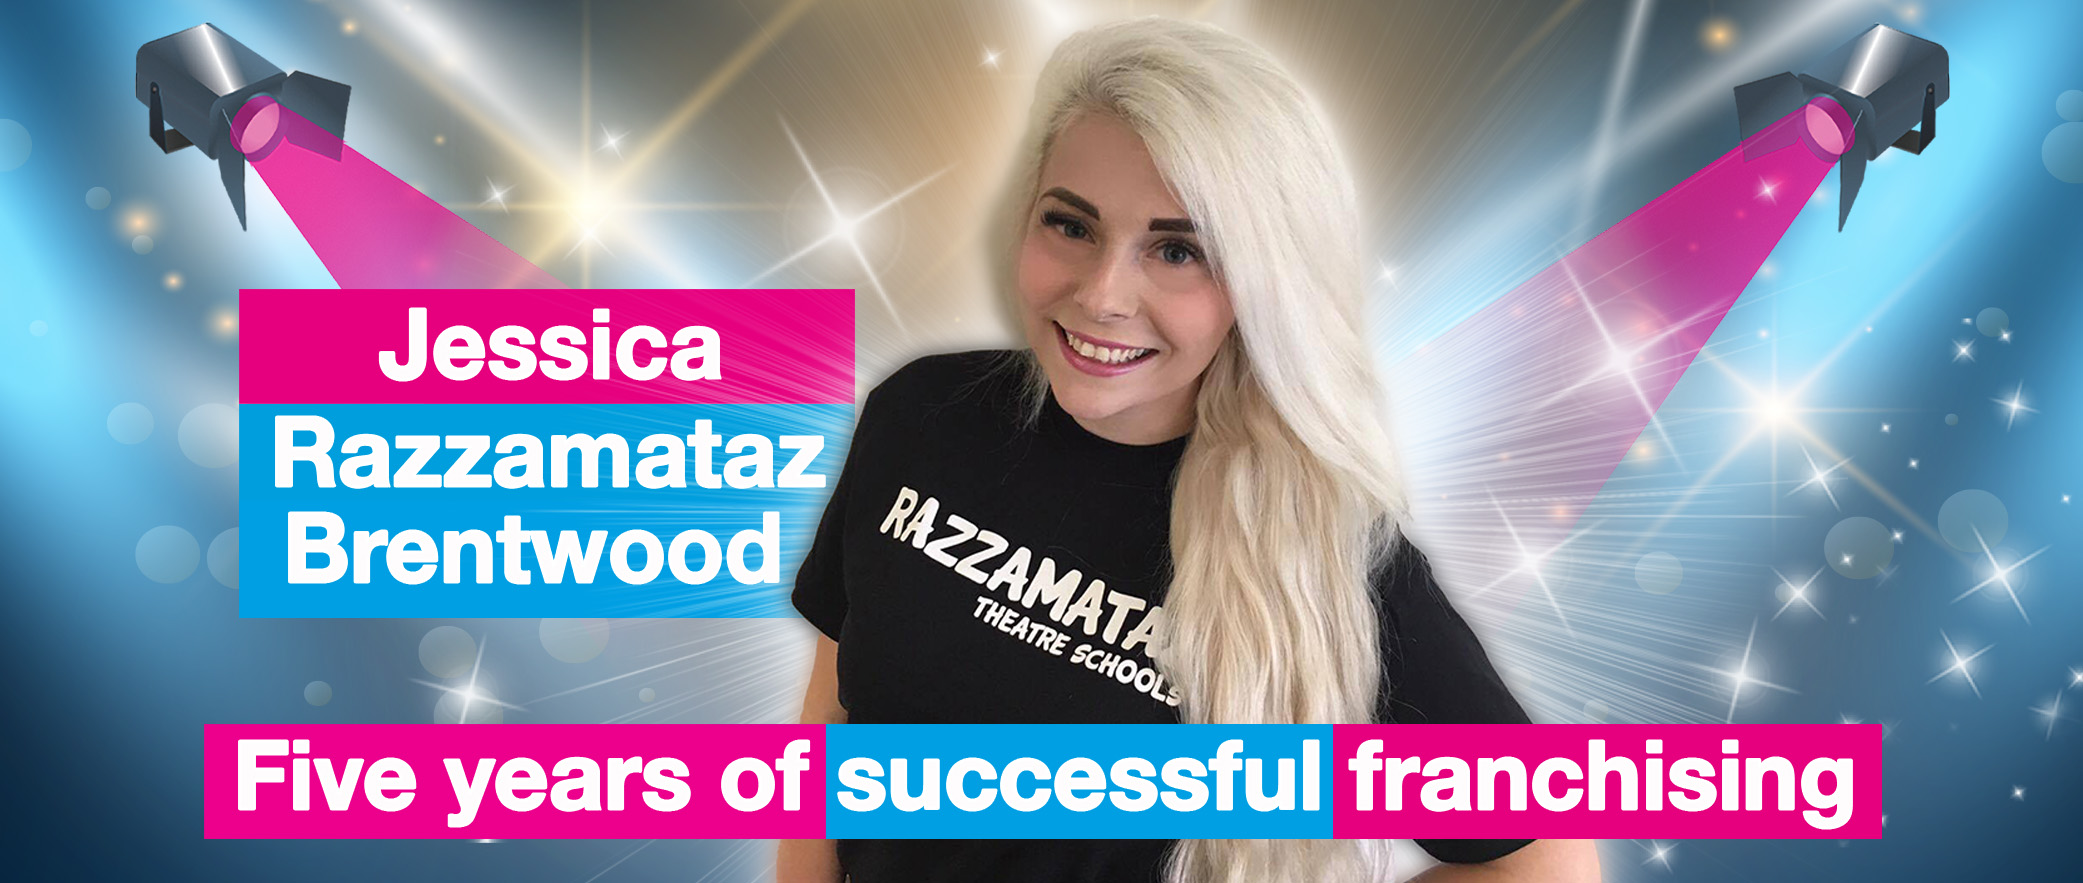 Jessica Razzamataz Brentwood - Five years of successful franchising